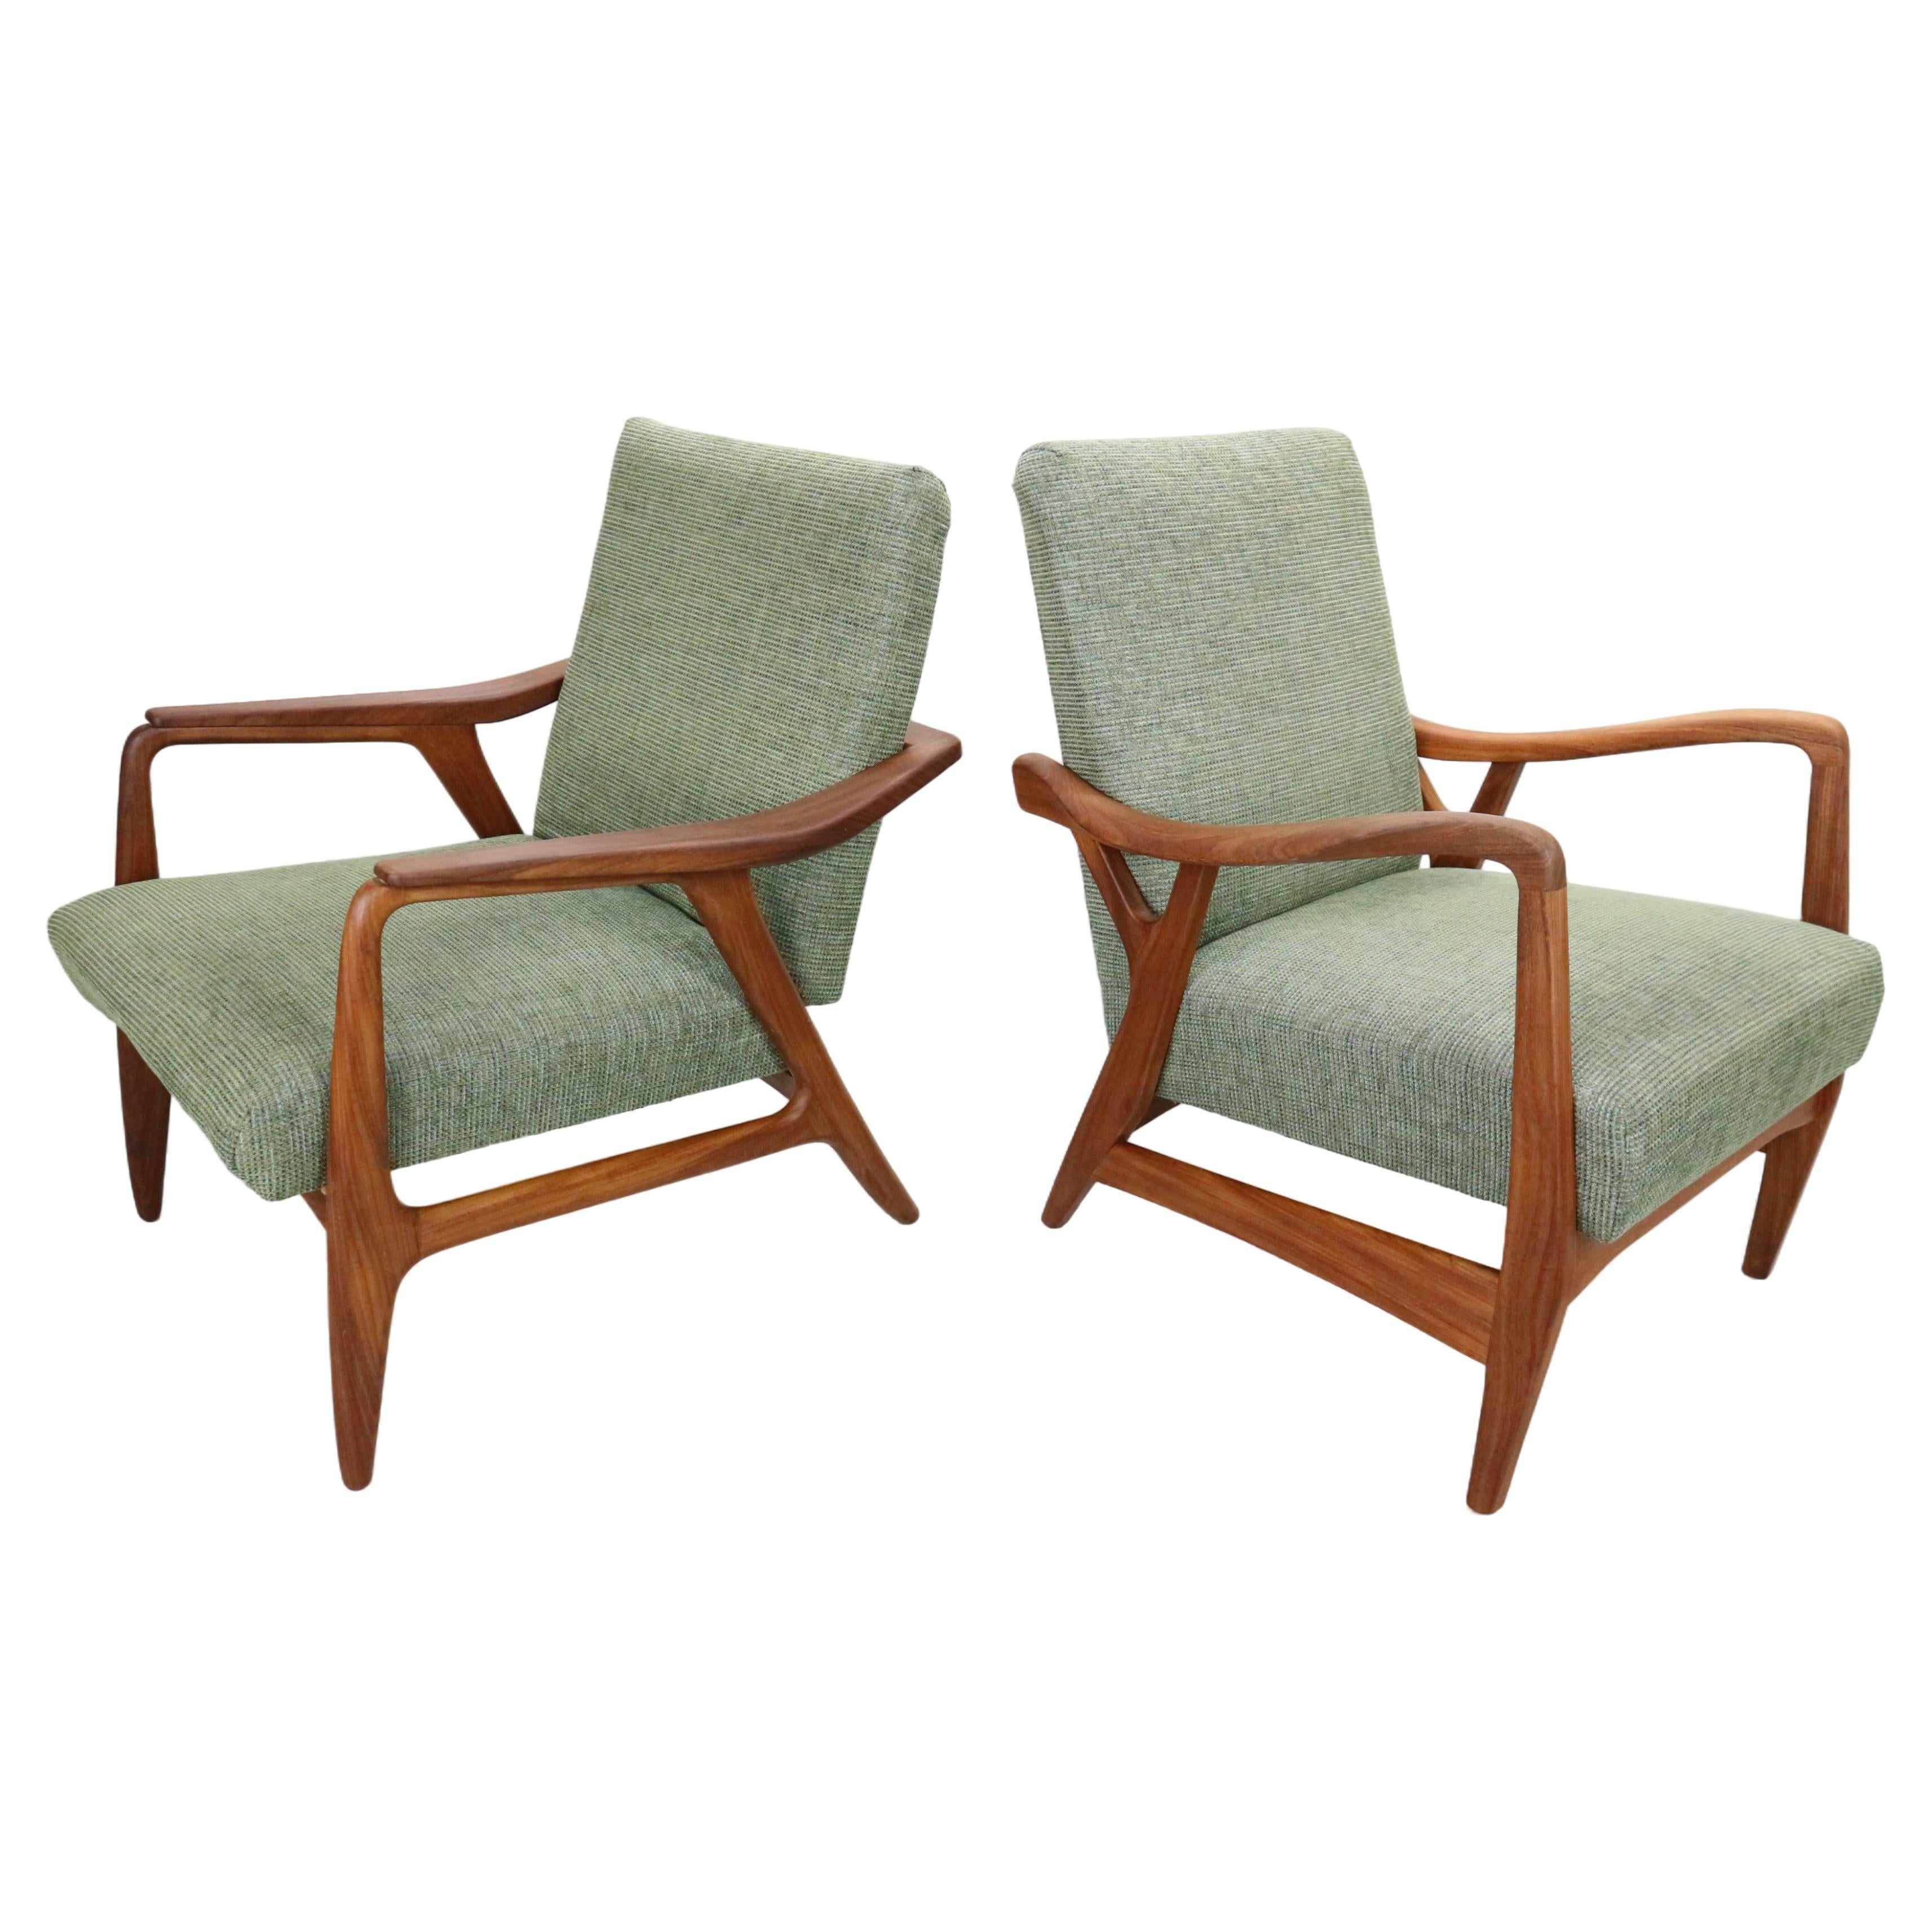 Set of two Danish vintage teak organic shaped Armchairs in green fabric, 1960's For Sale